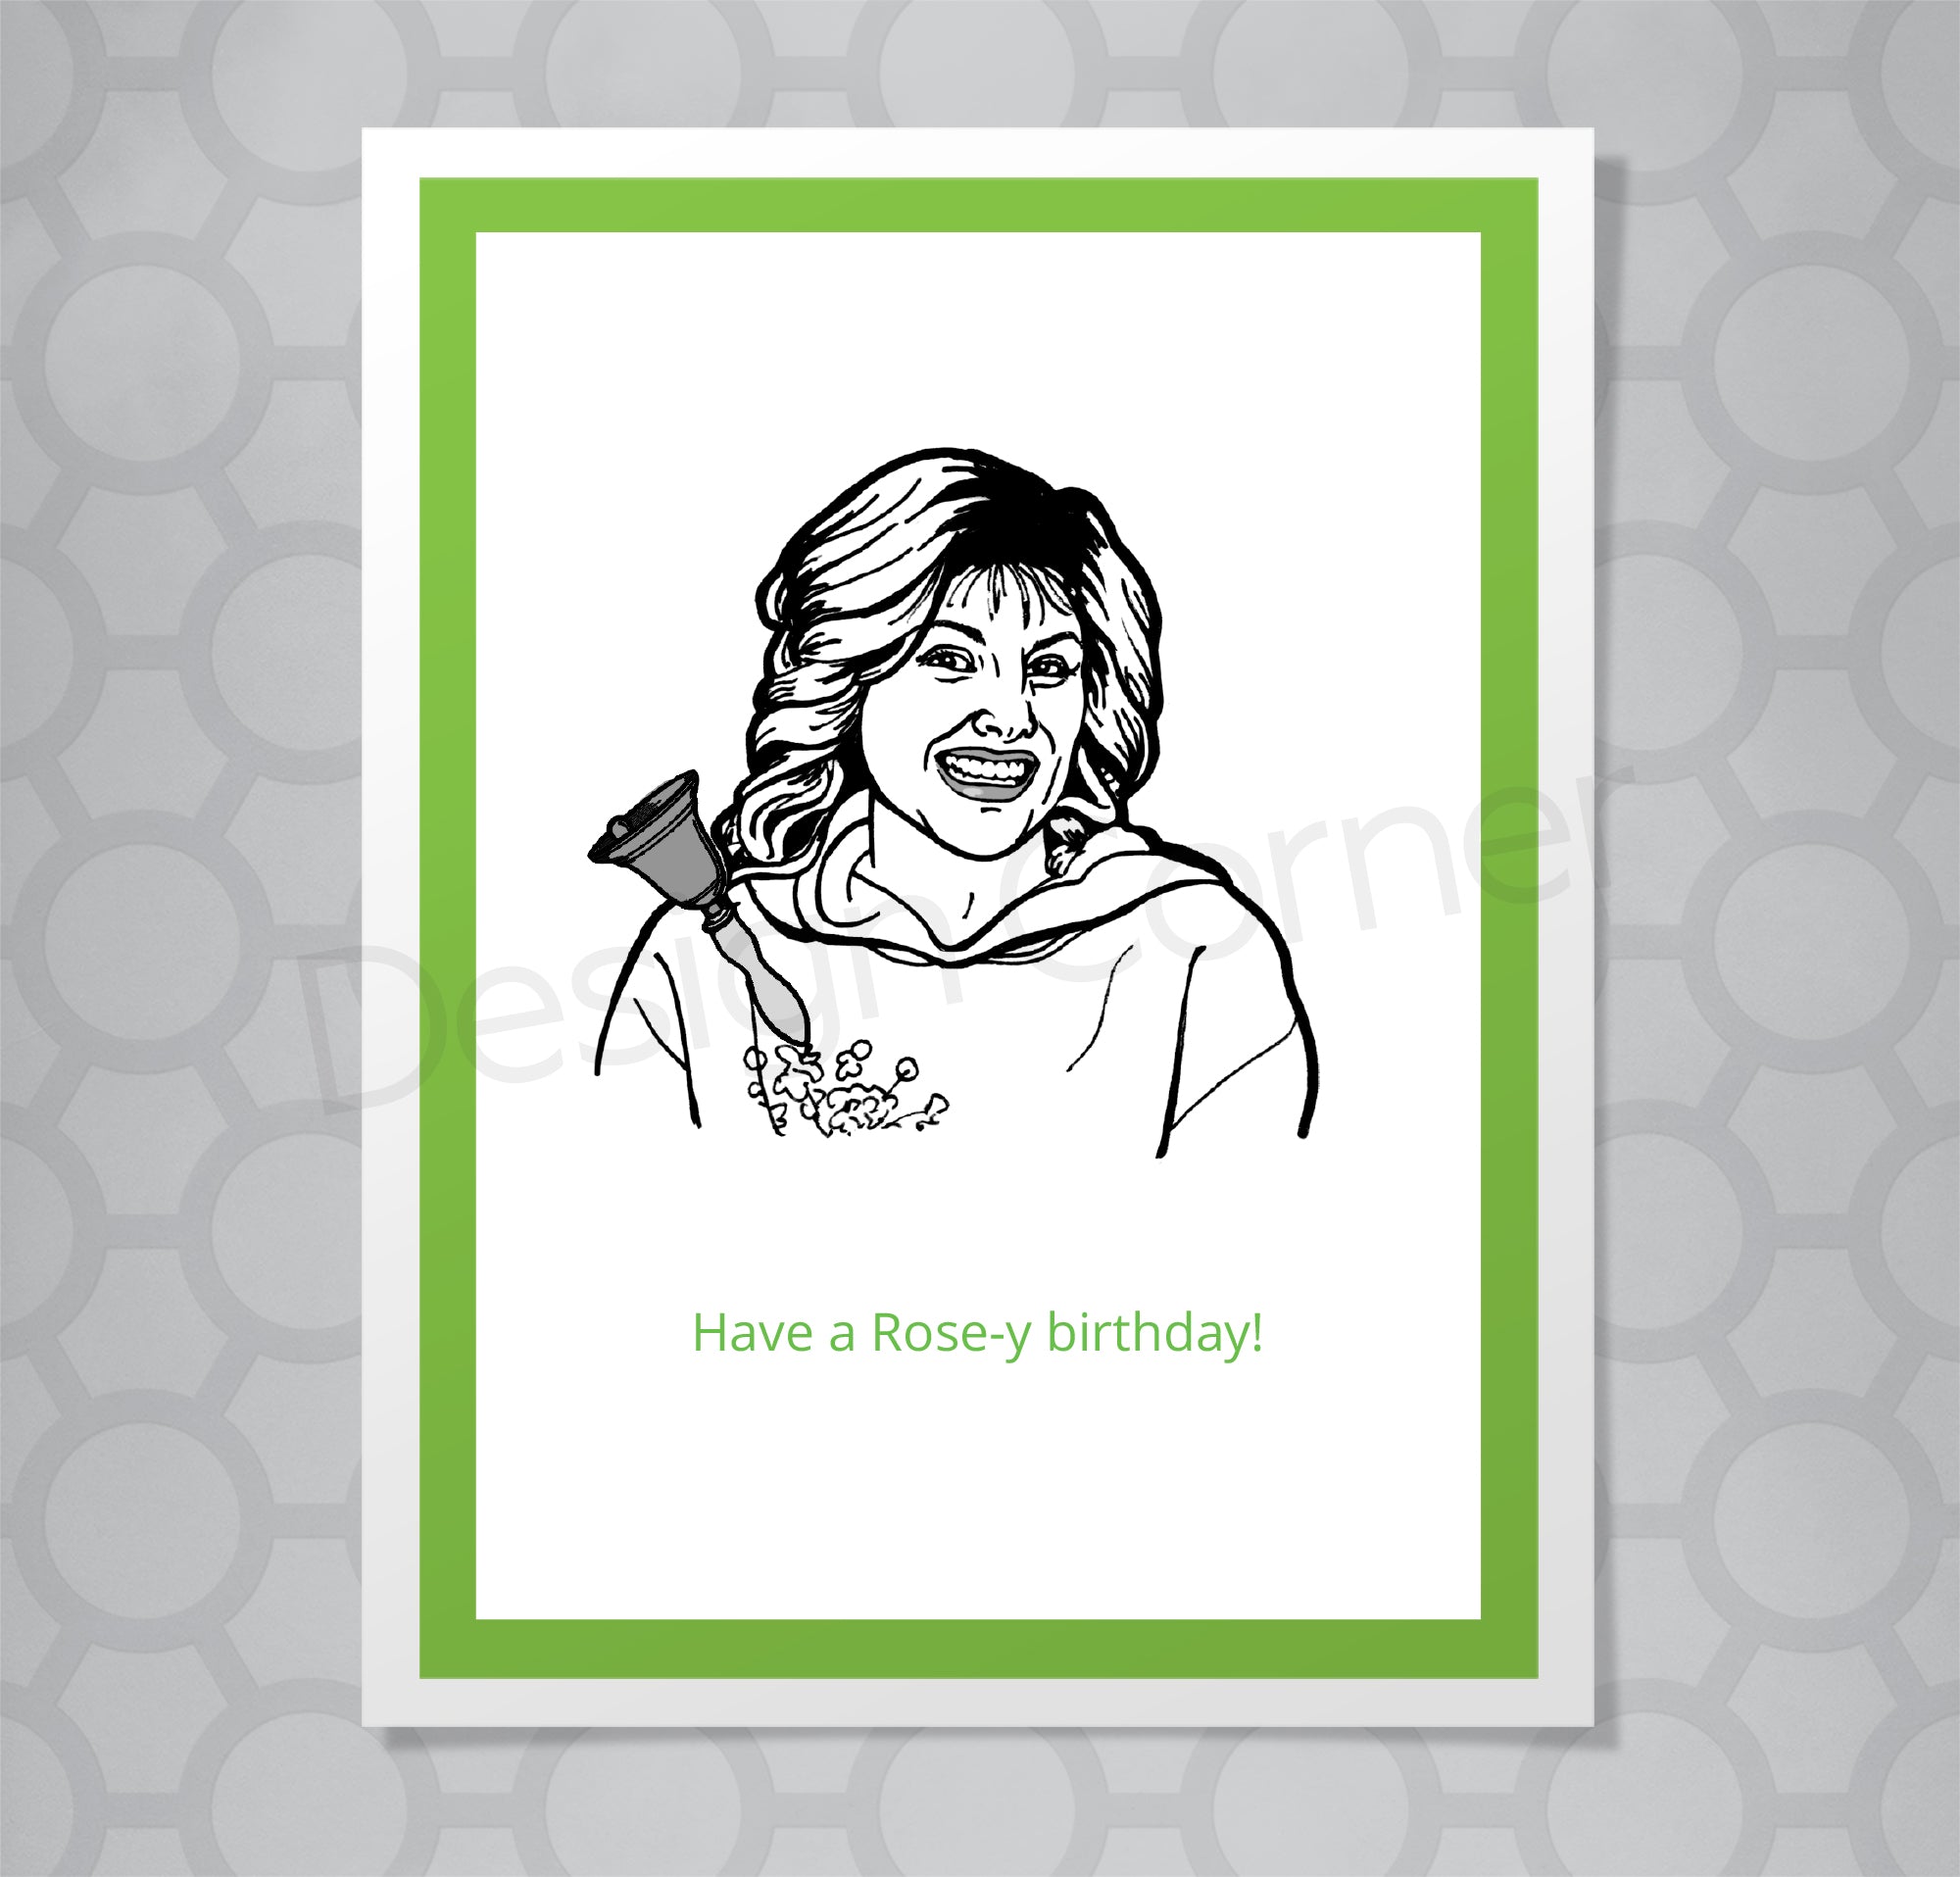 Illustration of Schitts Creek Jocelyn on greeting card with caption "Have a Rose-y birthday."